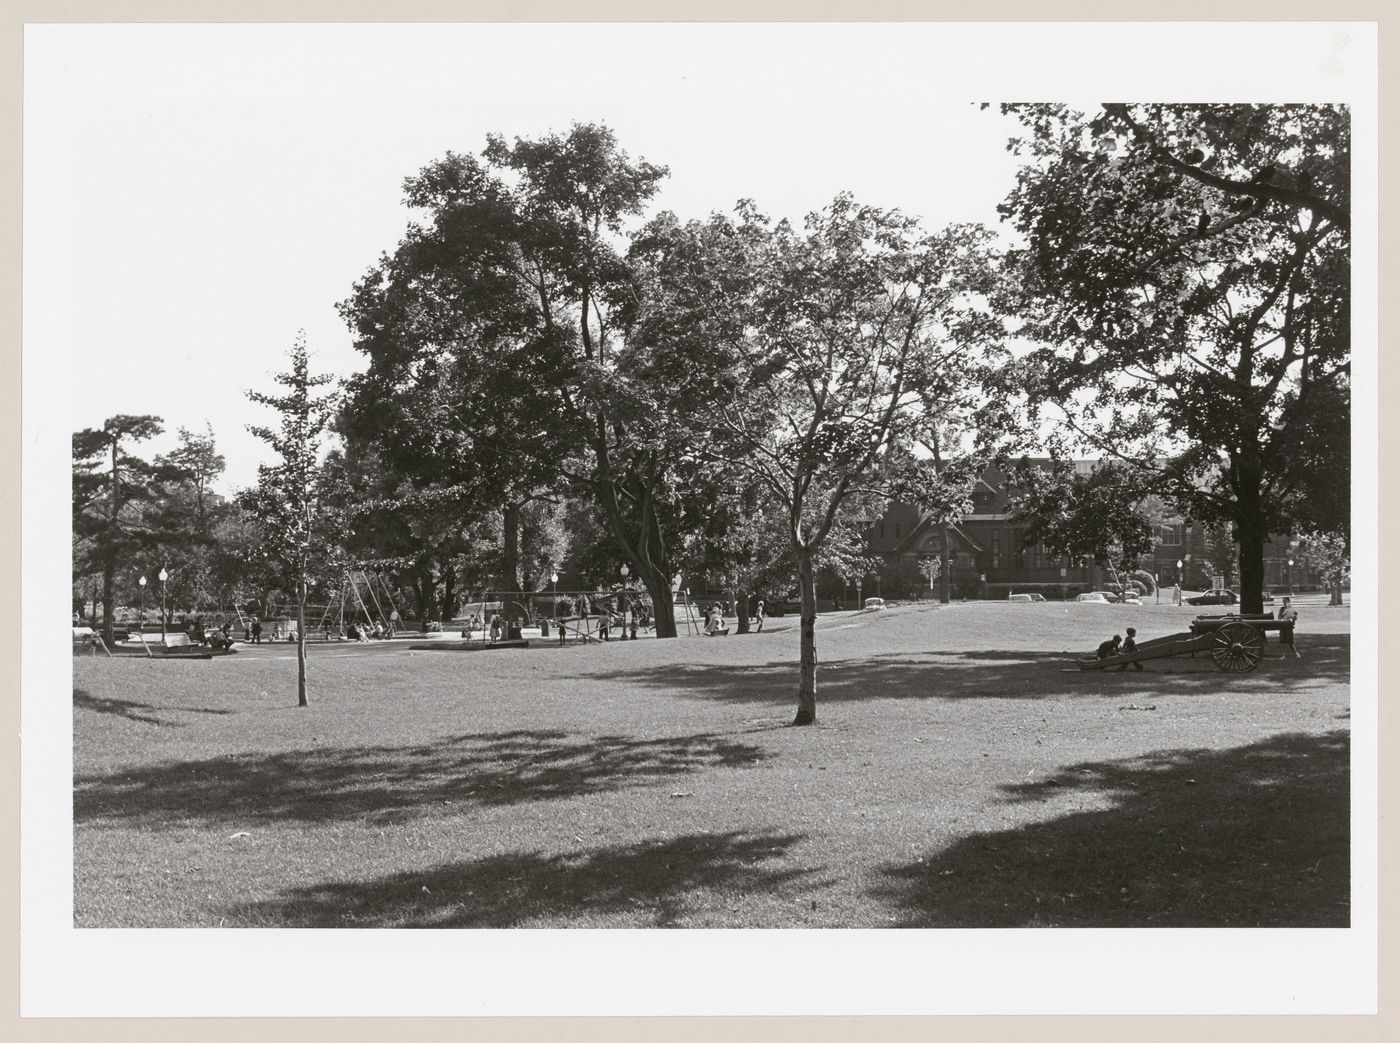 View of Westmount Park showing the playground and Westmount Library in the background, Québec